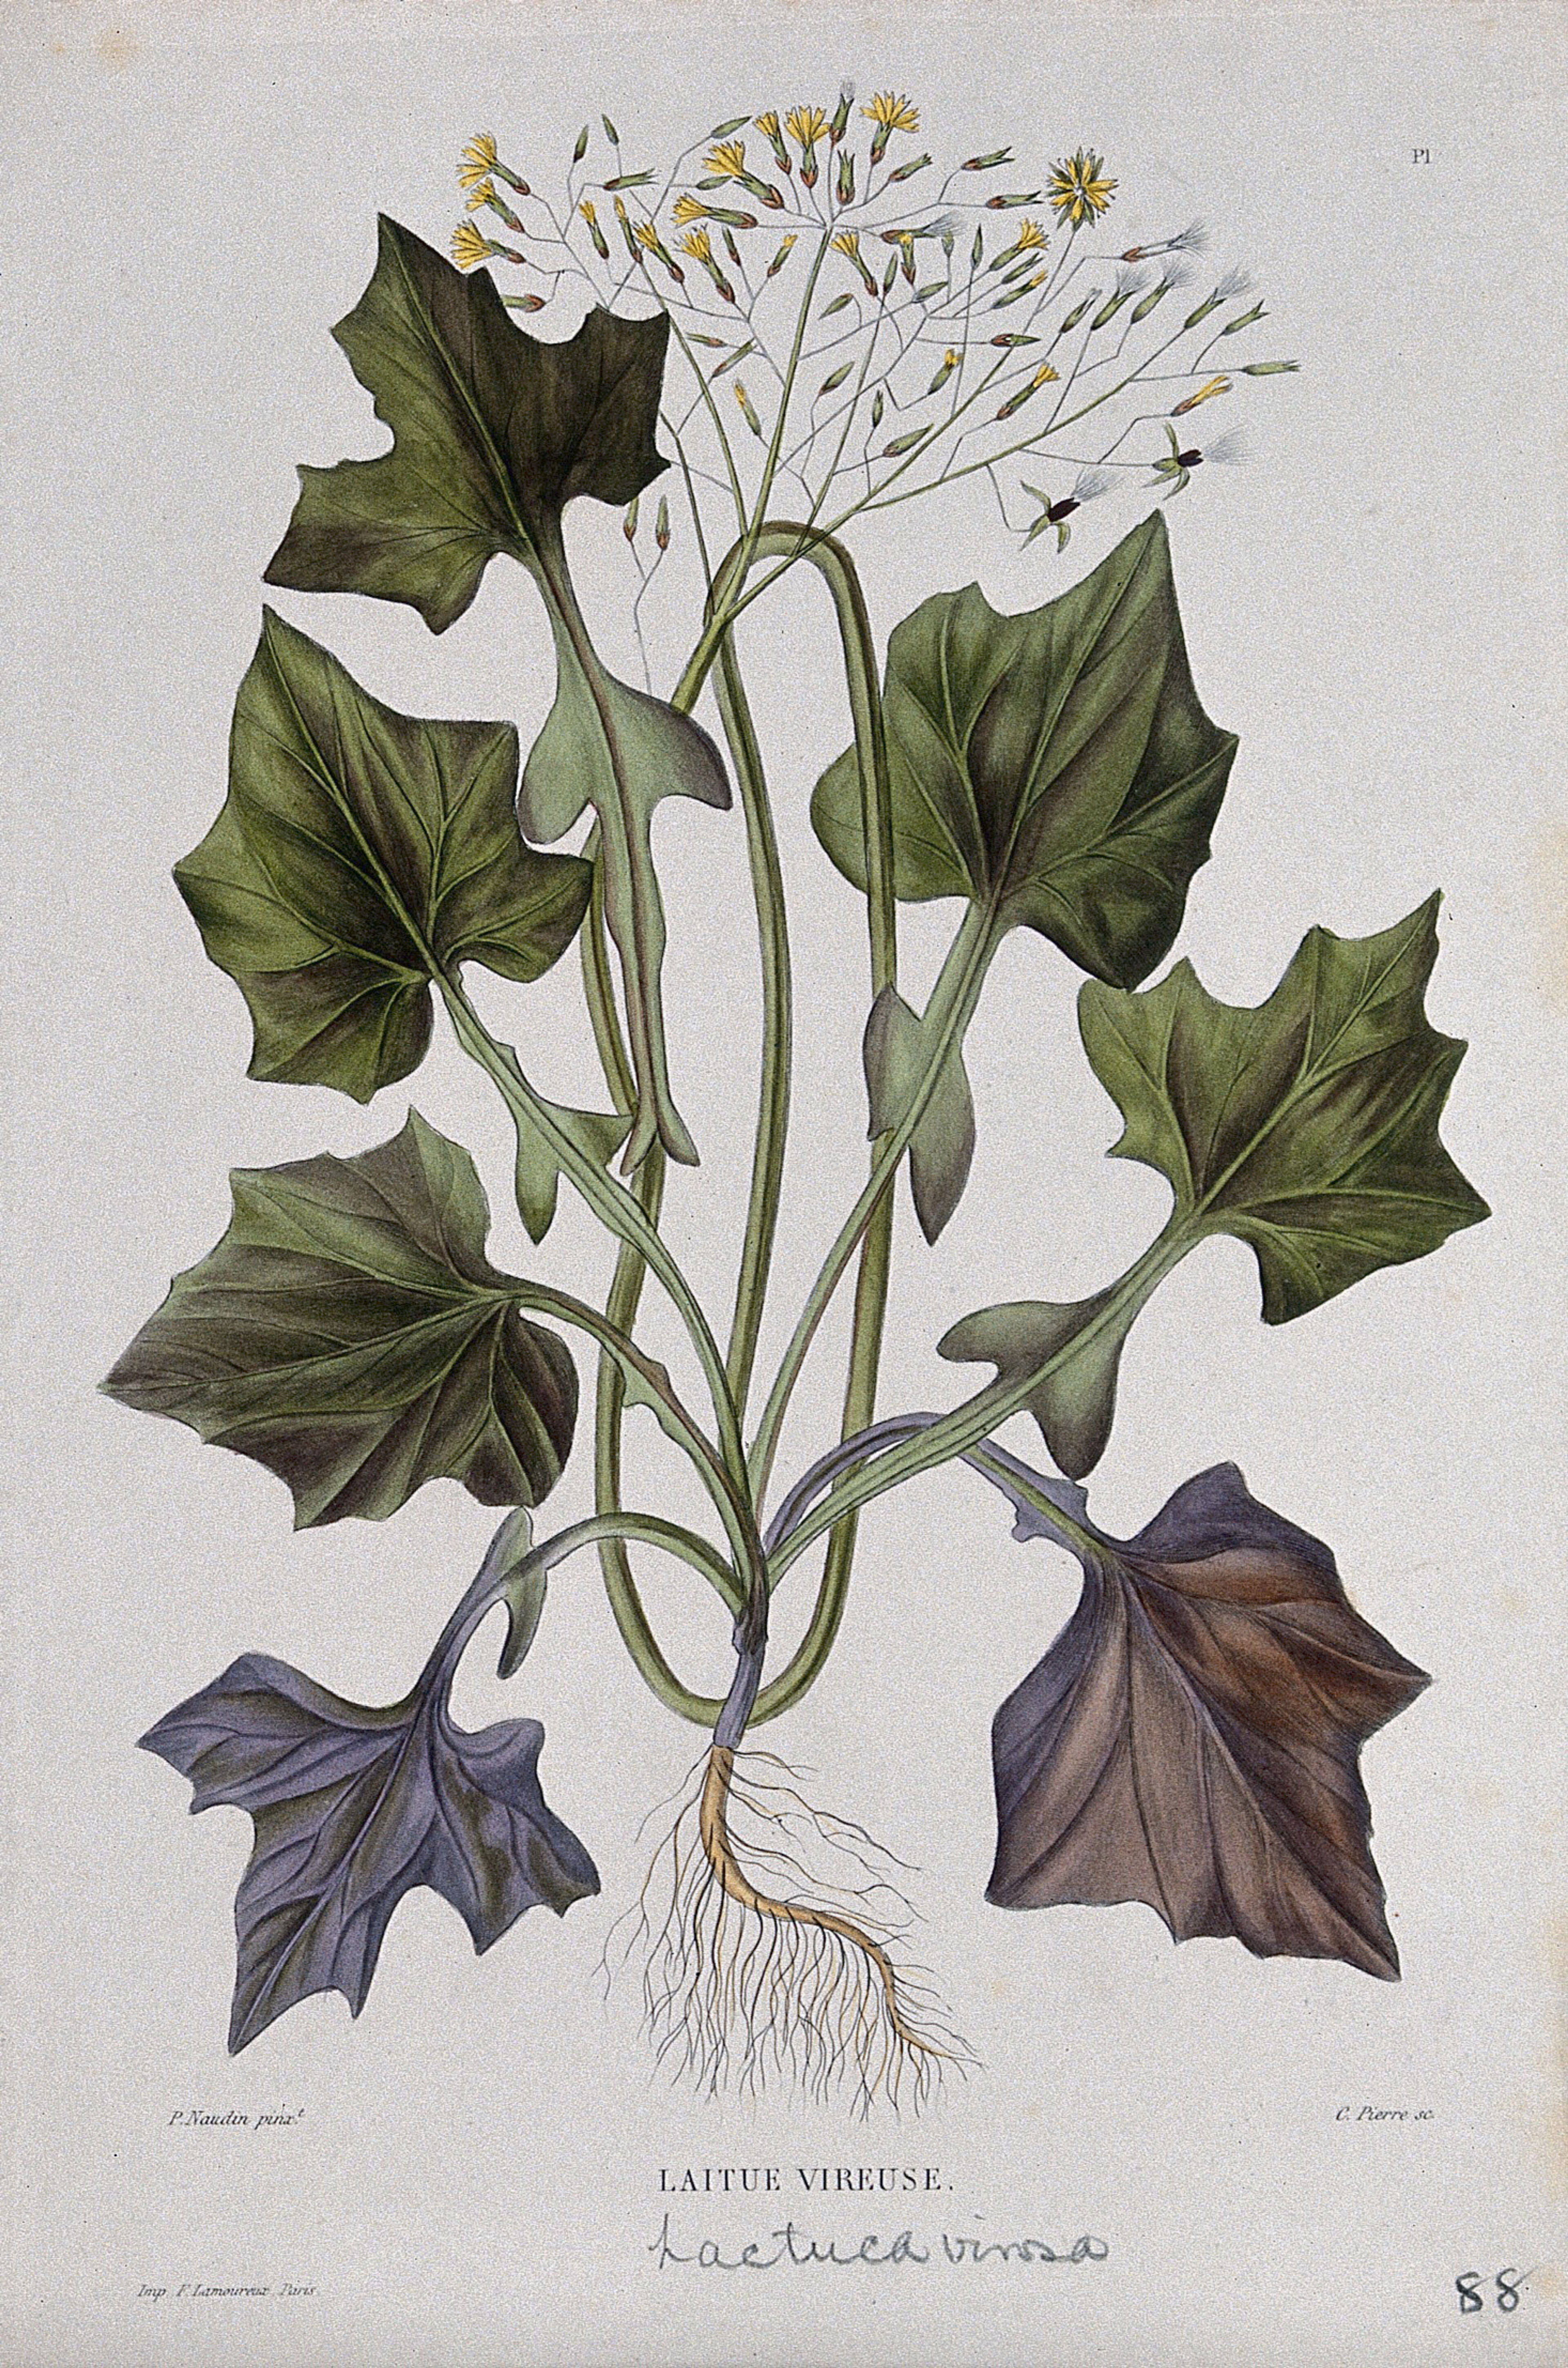 Opium lettuce (Lactuca virosa): entire flowering and fruiting plant. Coloured etching by C. Pierre, c. 1865, after P. Naudin.